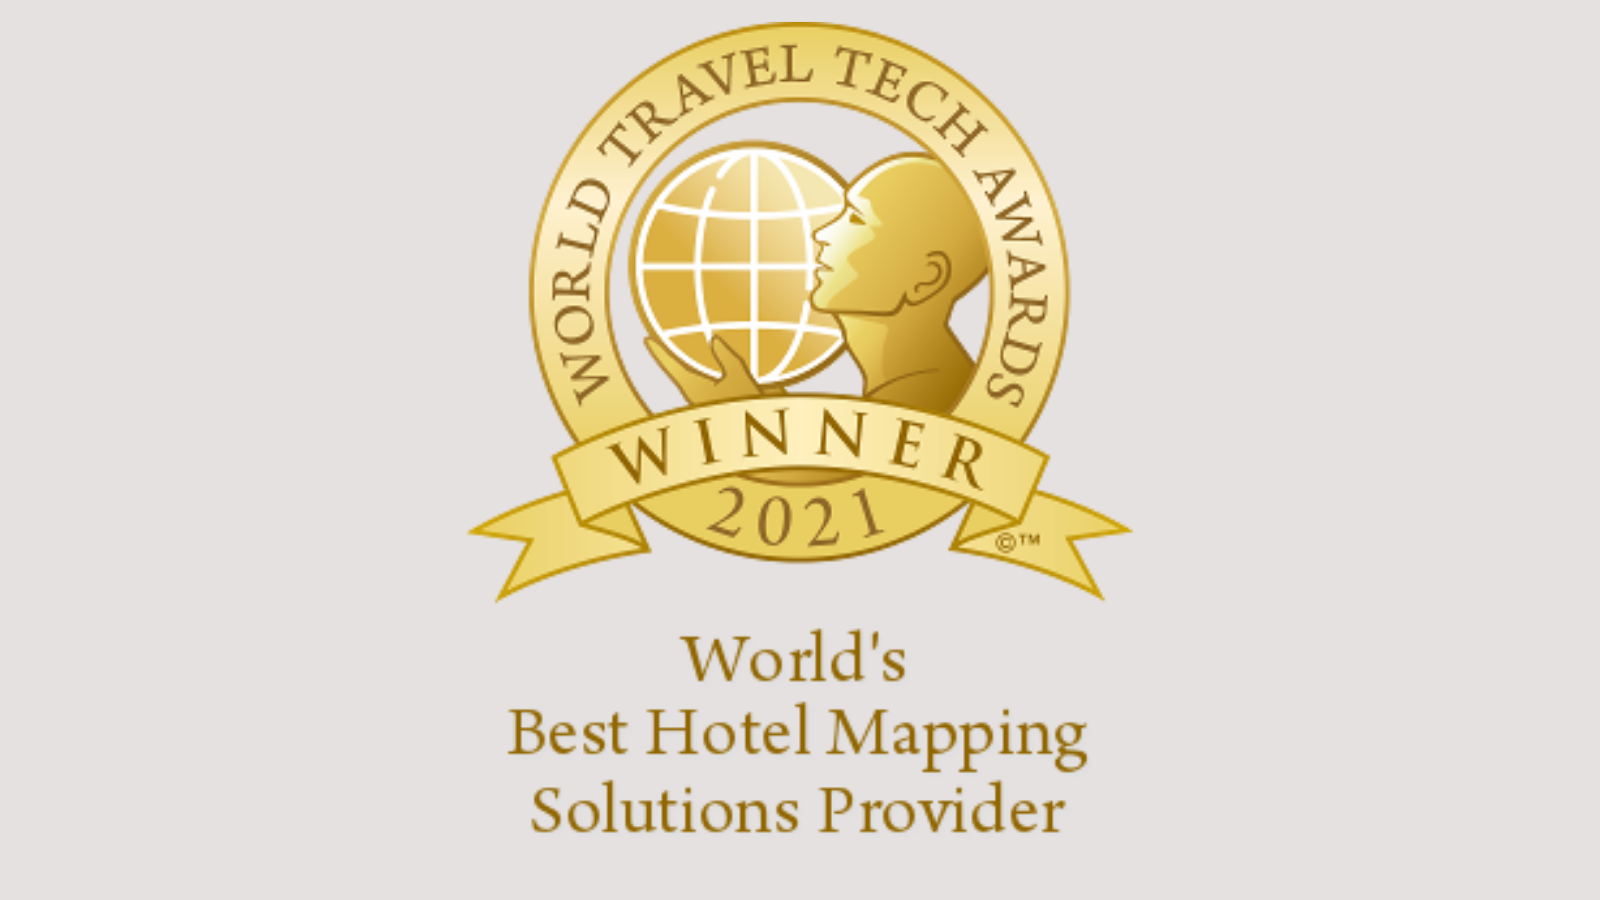 Vervotech Mappings Won The Best Hotel Mapping Solutions Provider 2021 by World Travel Tech Awards